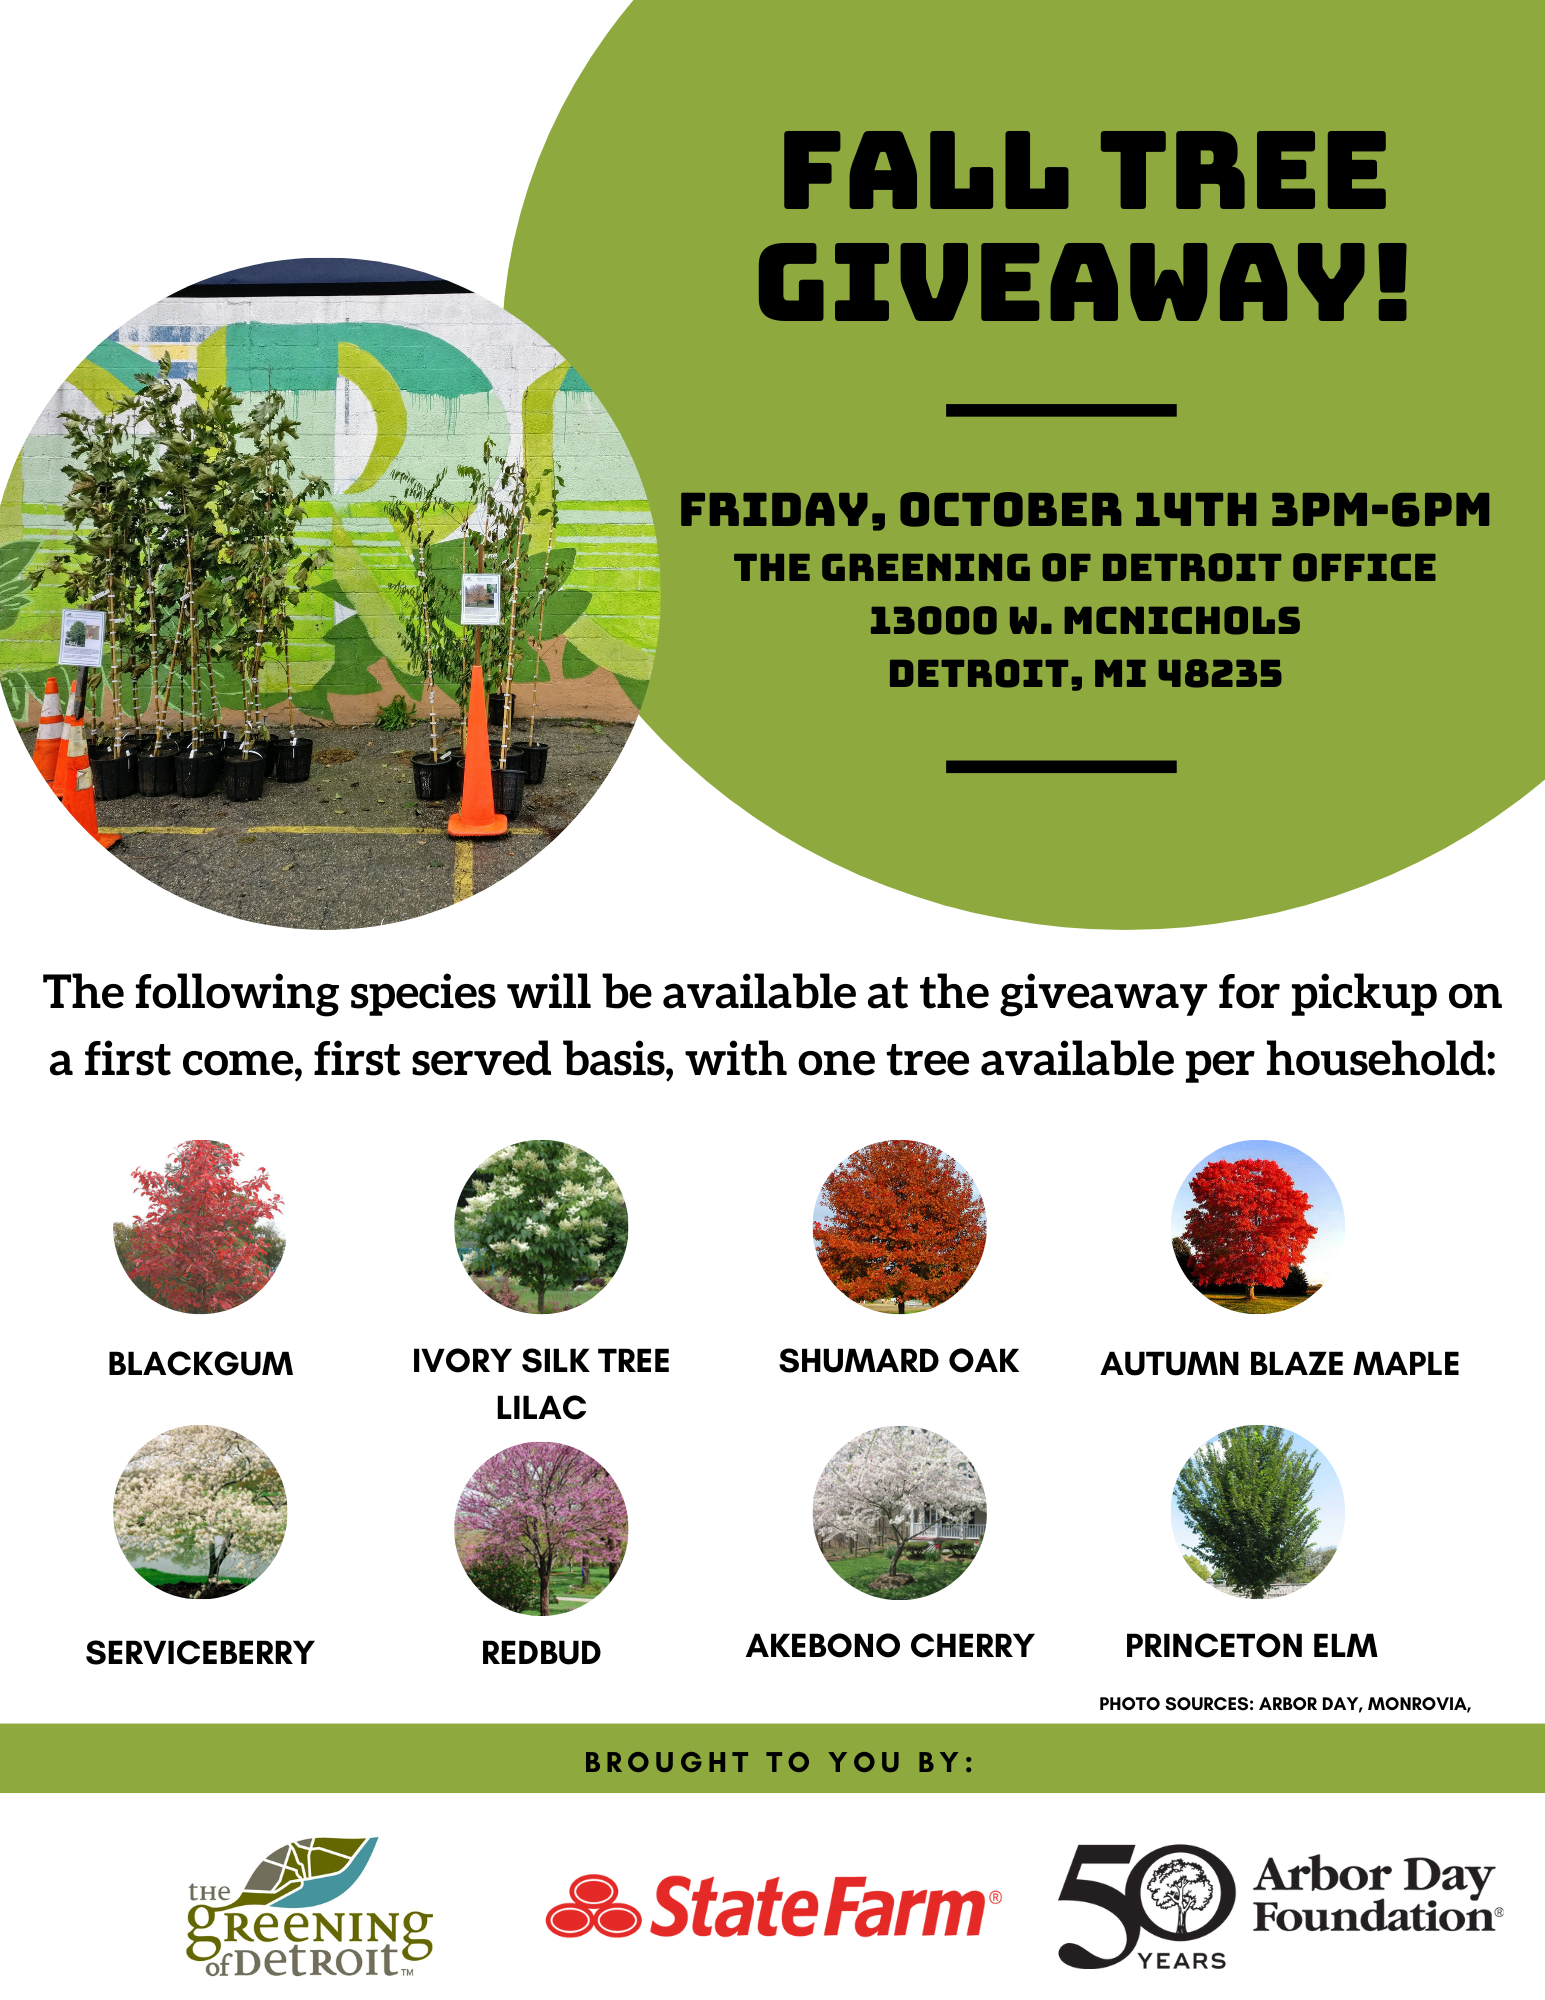 Fall Tree Giveaway Friday, October 14th from 3pm